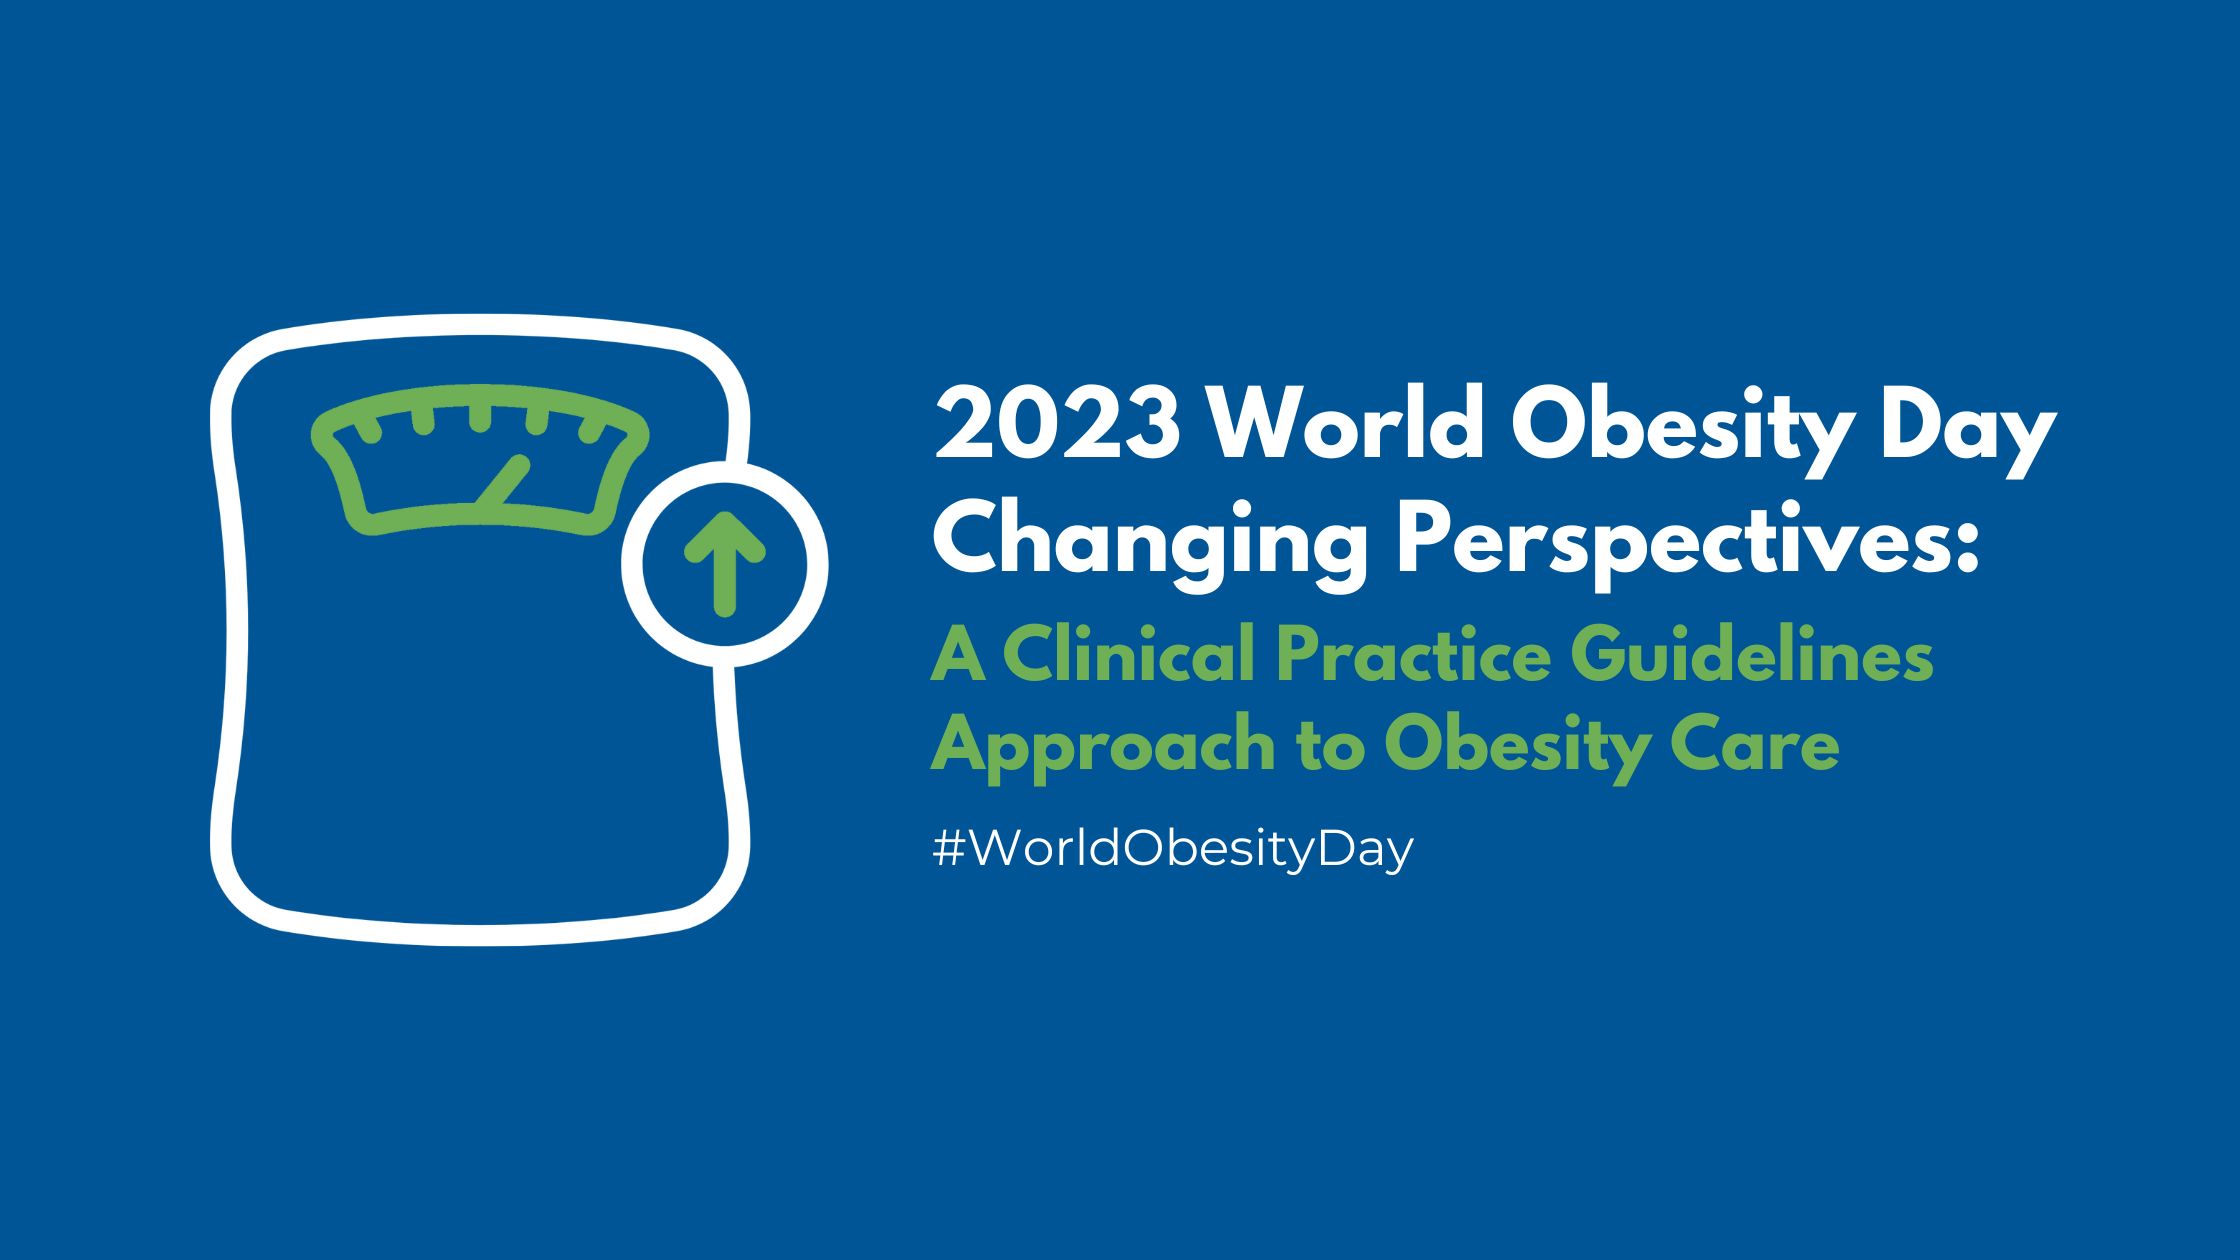 World Obesity Day 2023 Changing Perspectives A Clinical Practice